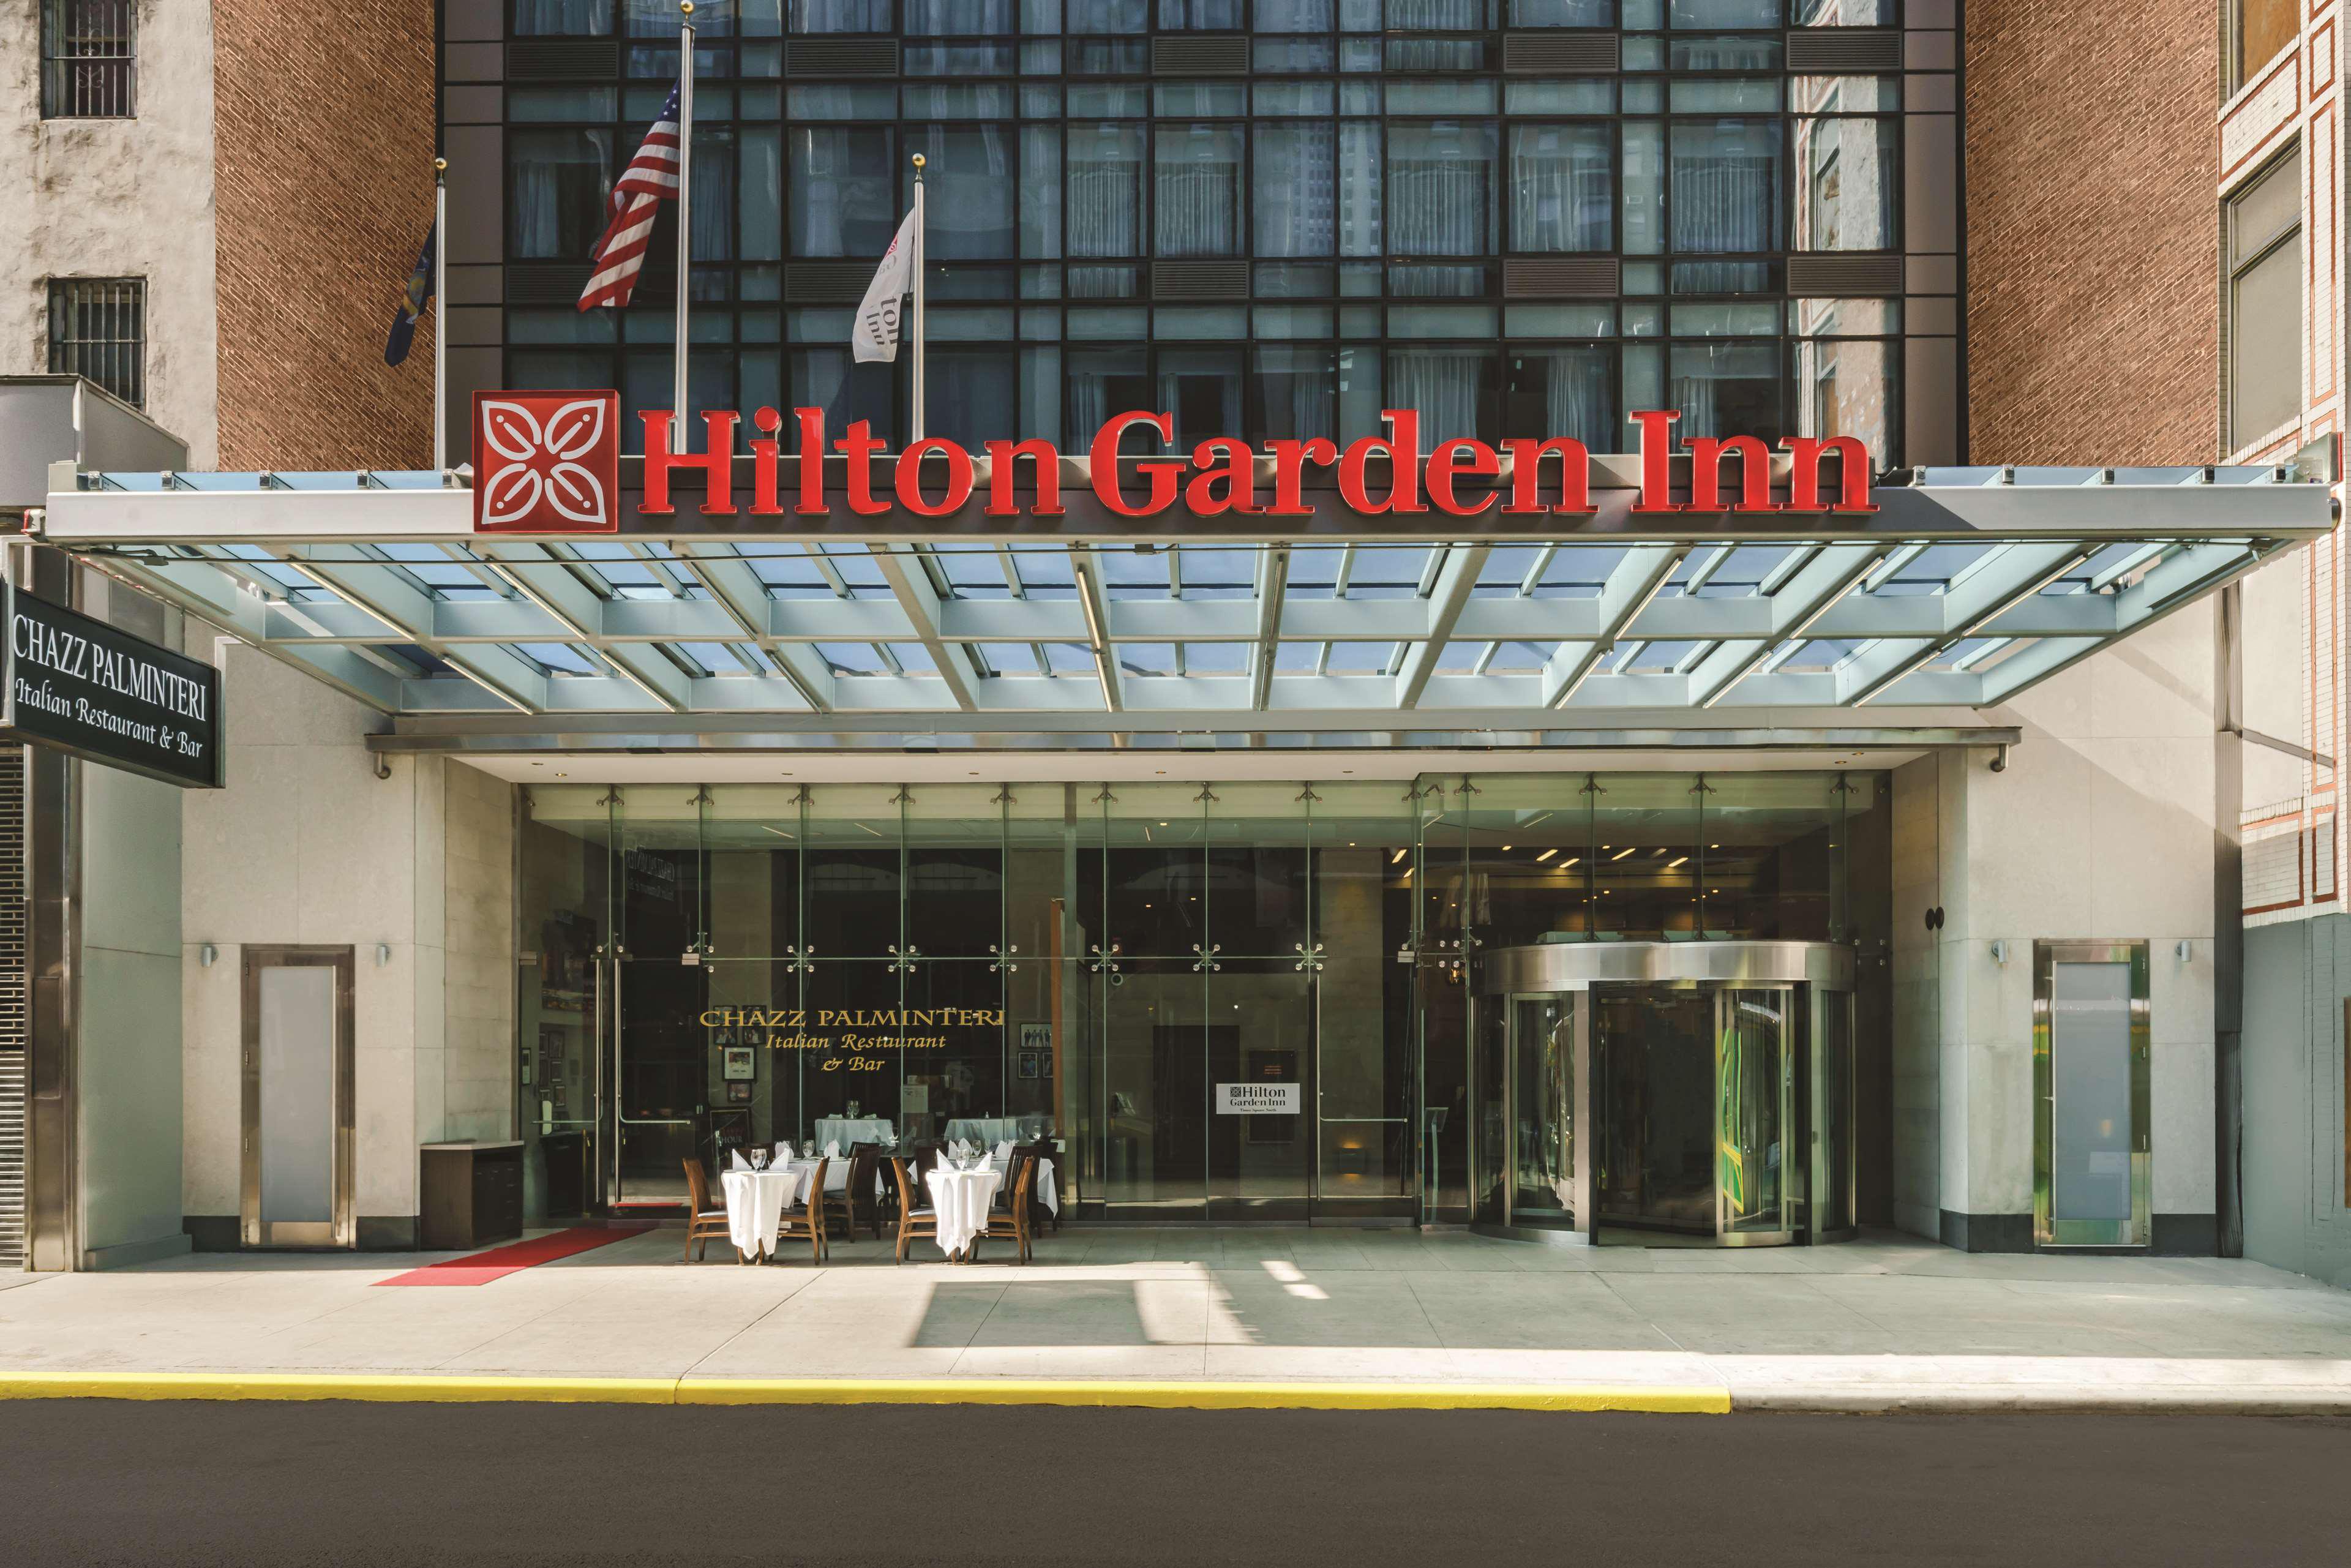 Hilton Garden Inn New York Times Square North 30 W 46th St New York Ny Mapquest